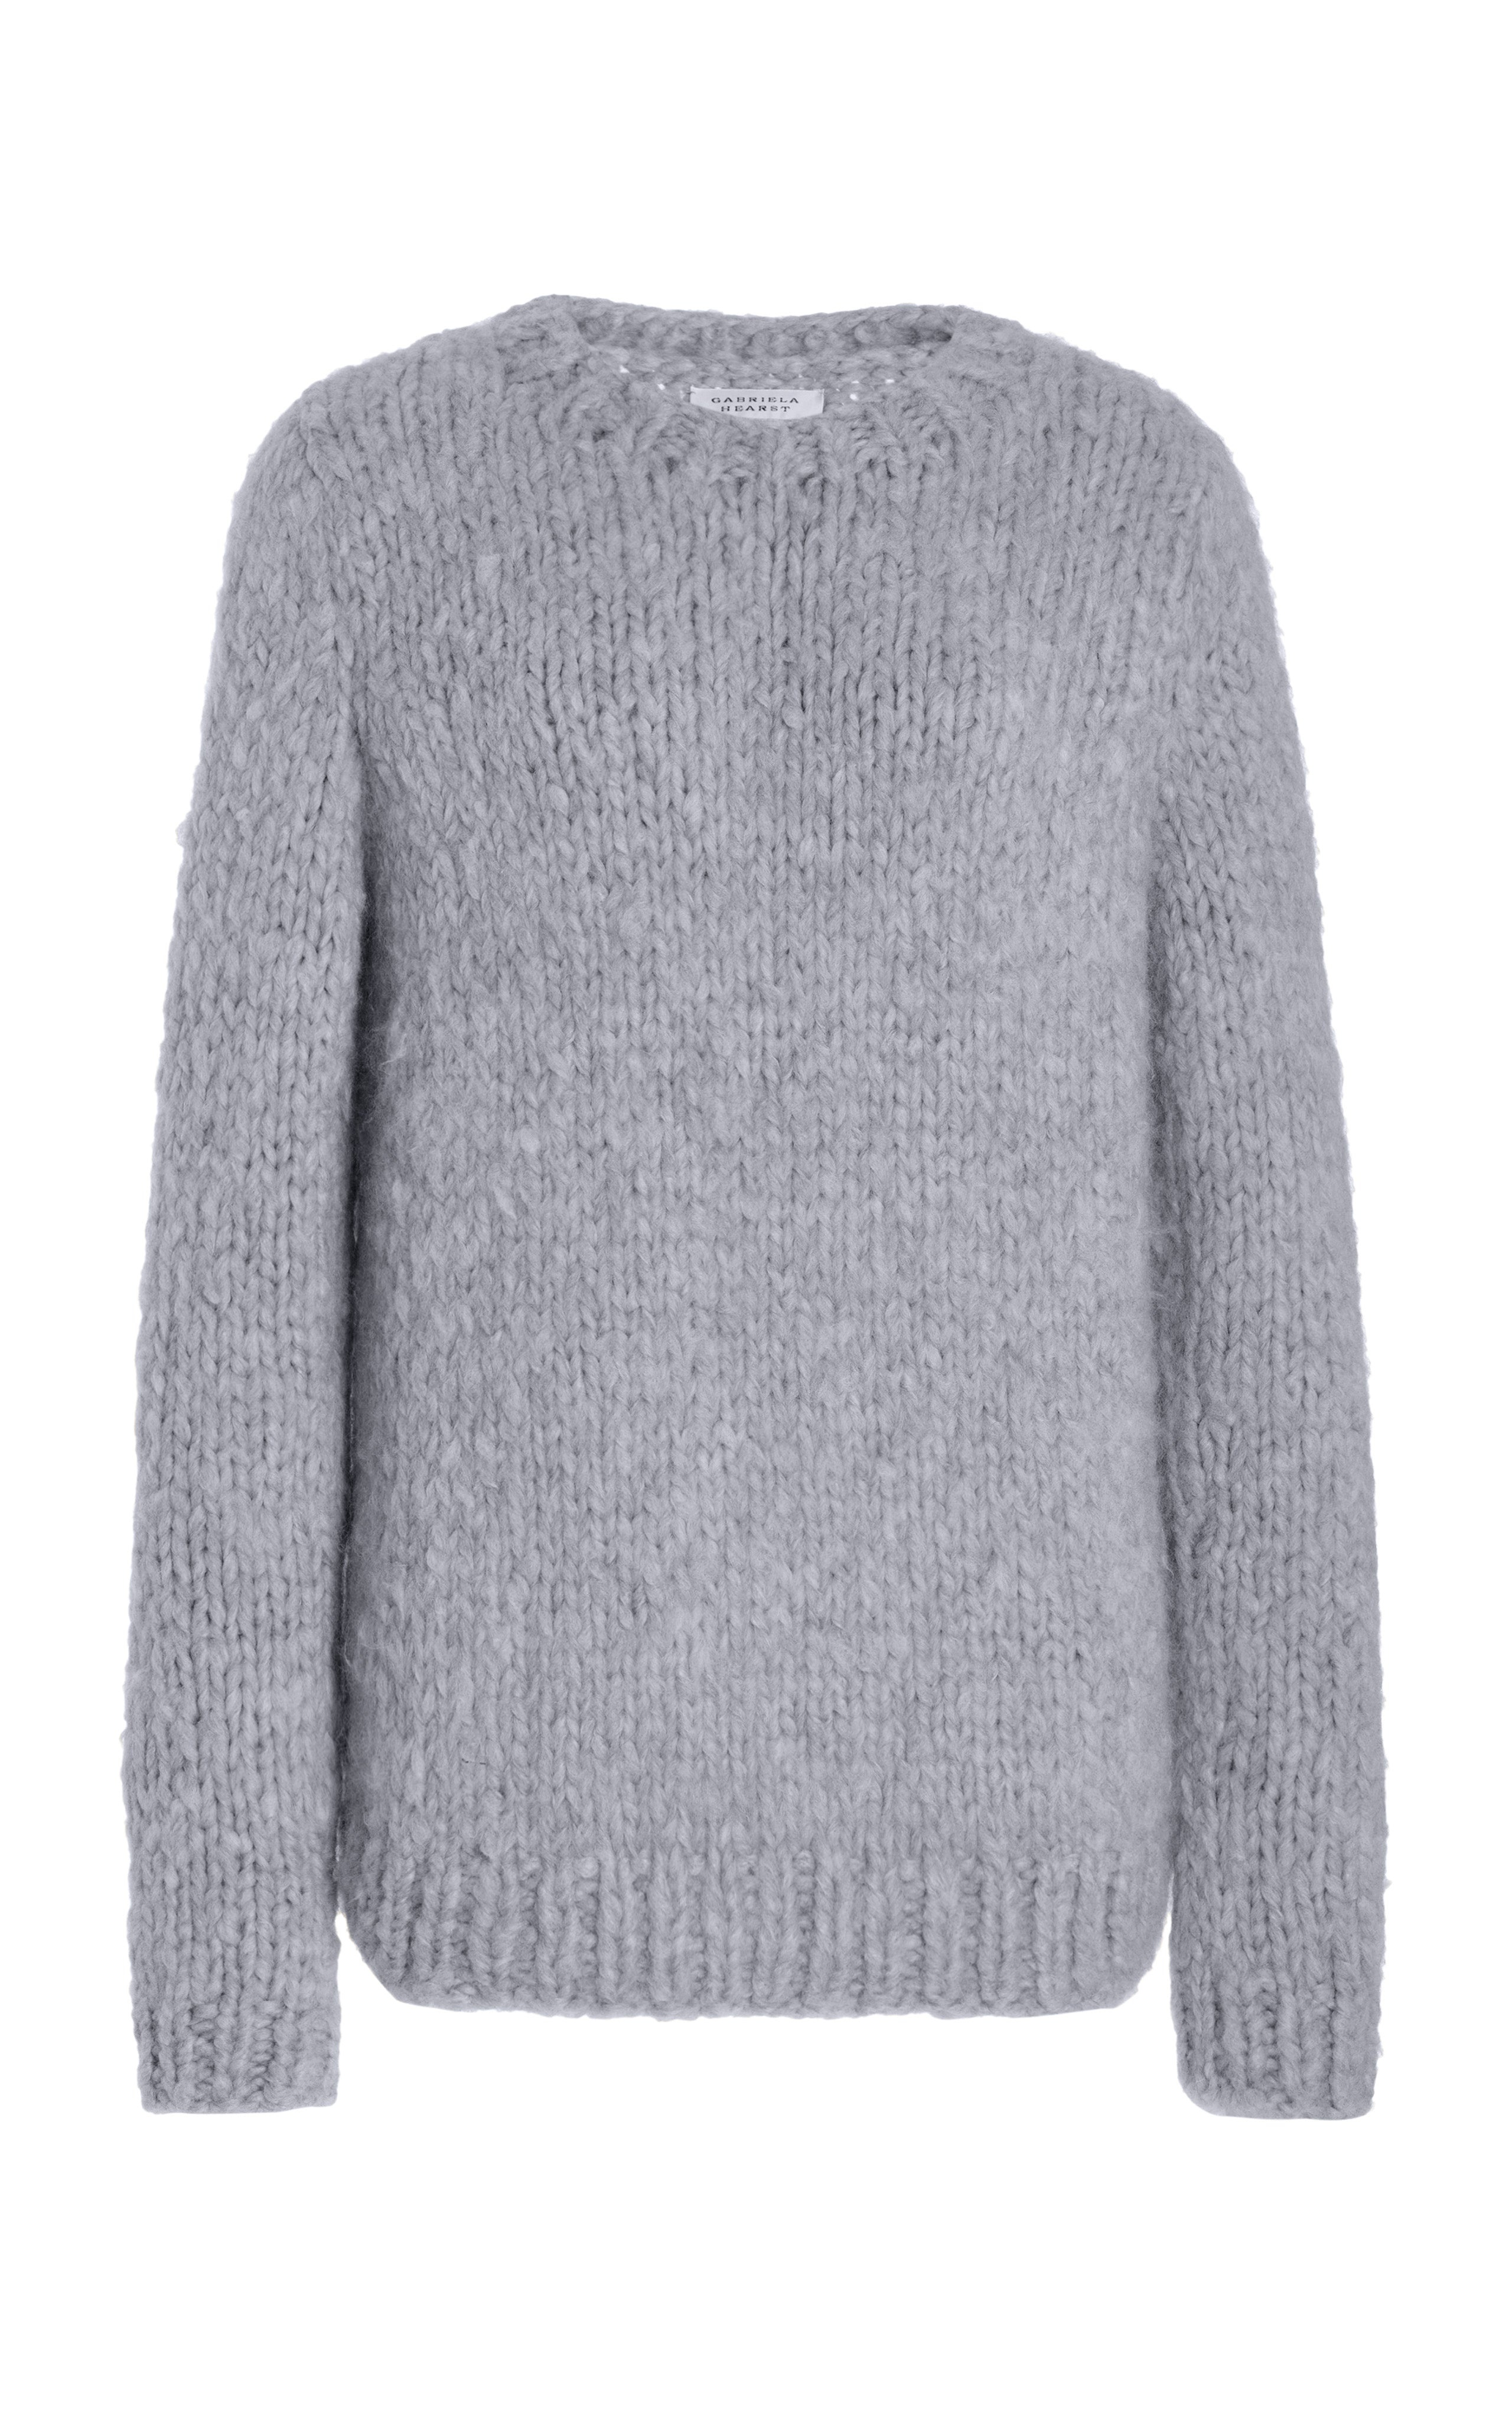 Lawrence Knit Sweater in Heather Grey Welfat Cashmere - 1